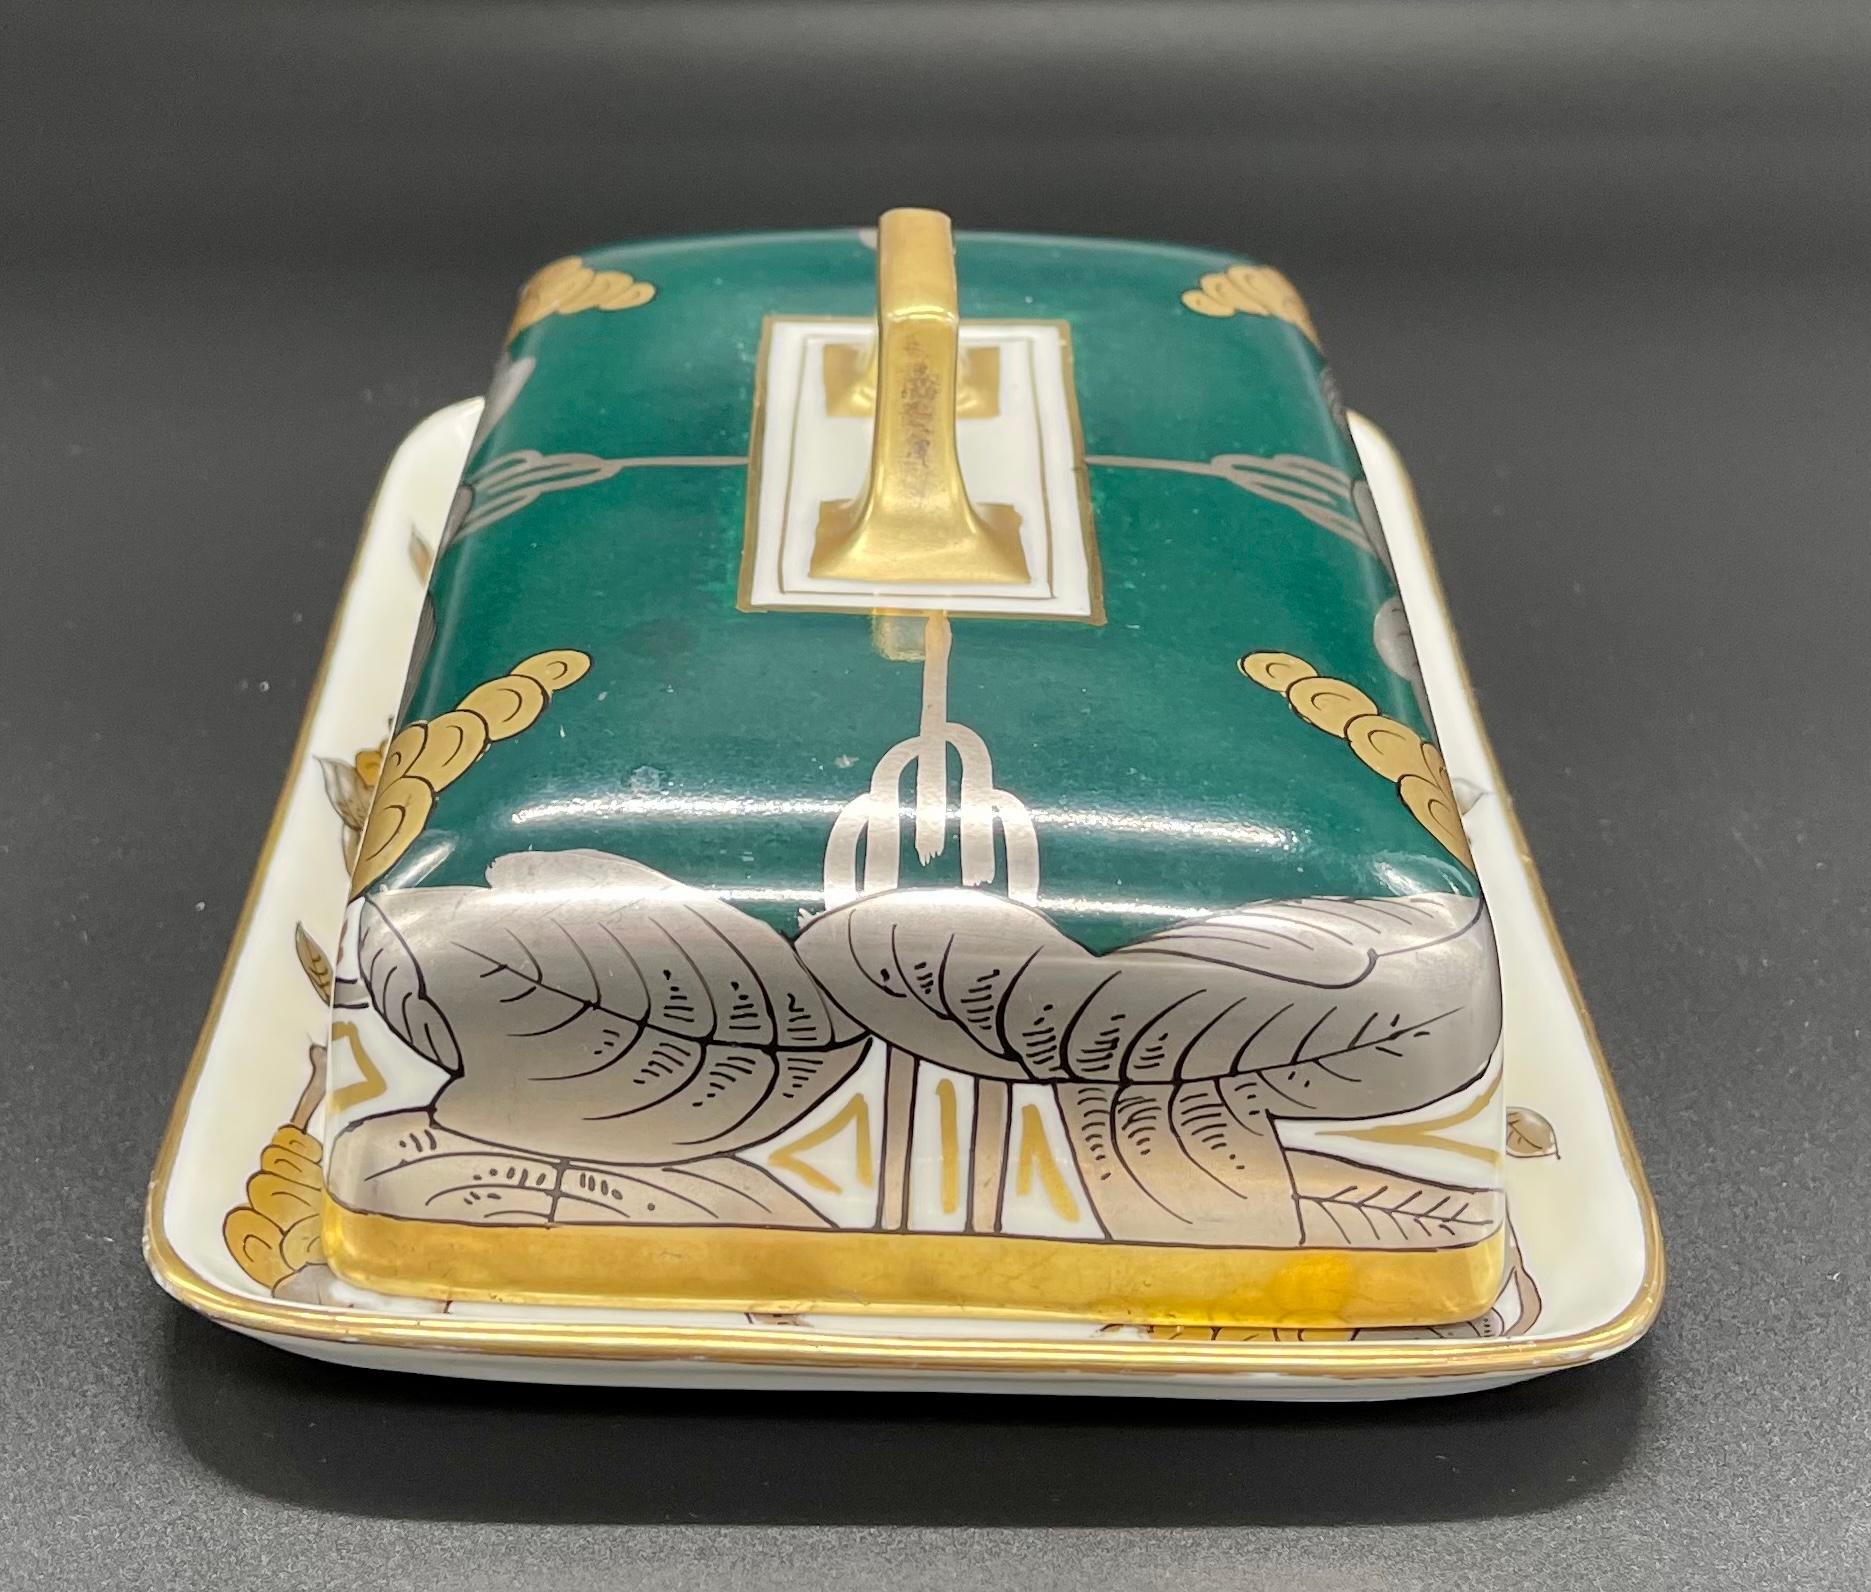 C.F. Boseck and Co., Bohemia, Austria Art Deco porcelain Butter Dish from 1920's. Beautiful hand painted heavy gold gilt porcelain dish. Excellent condition with very slight wear. Winged crown manufacture stamped at bottom.